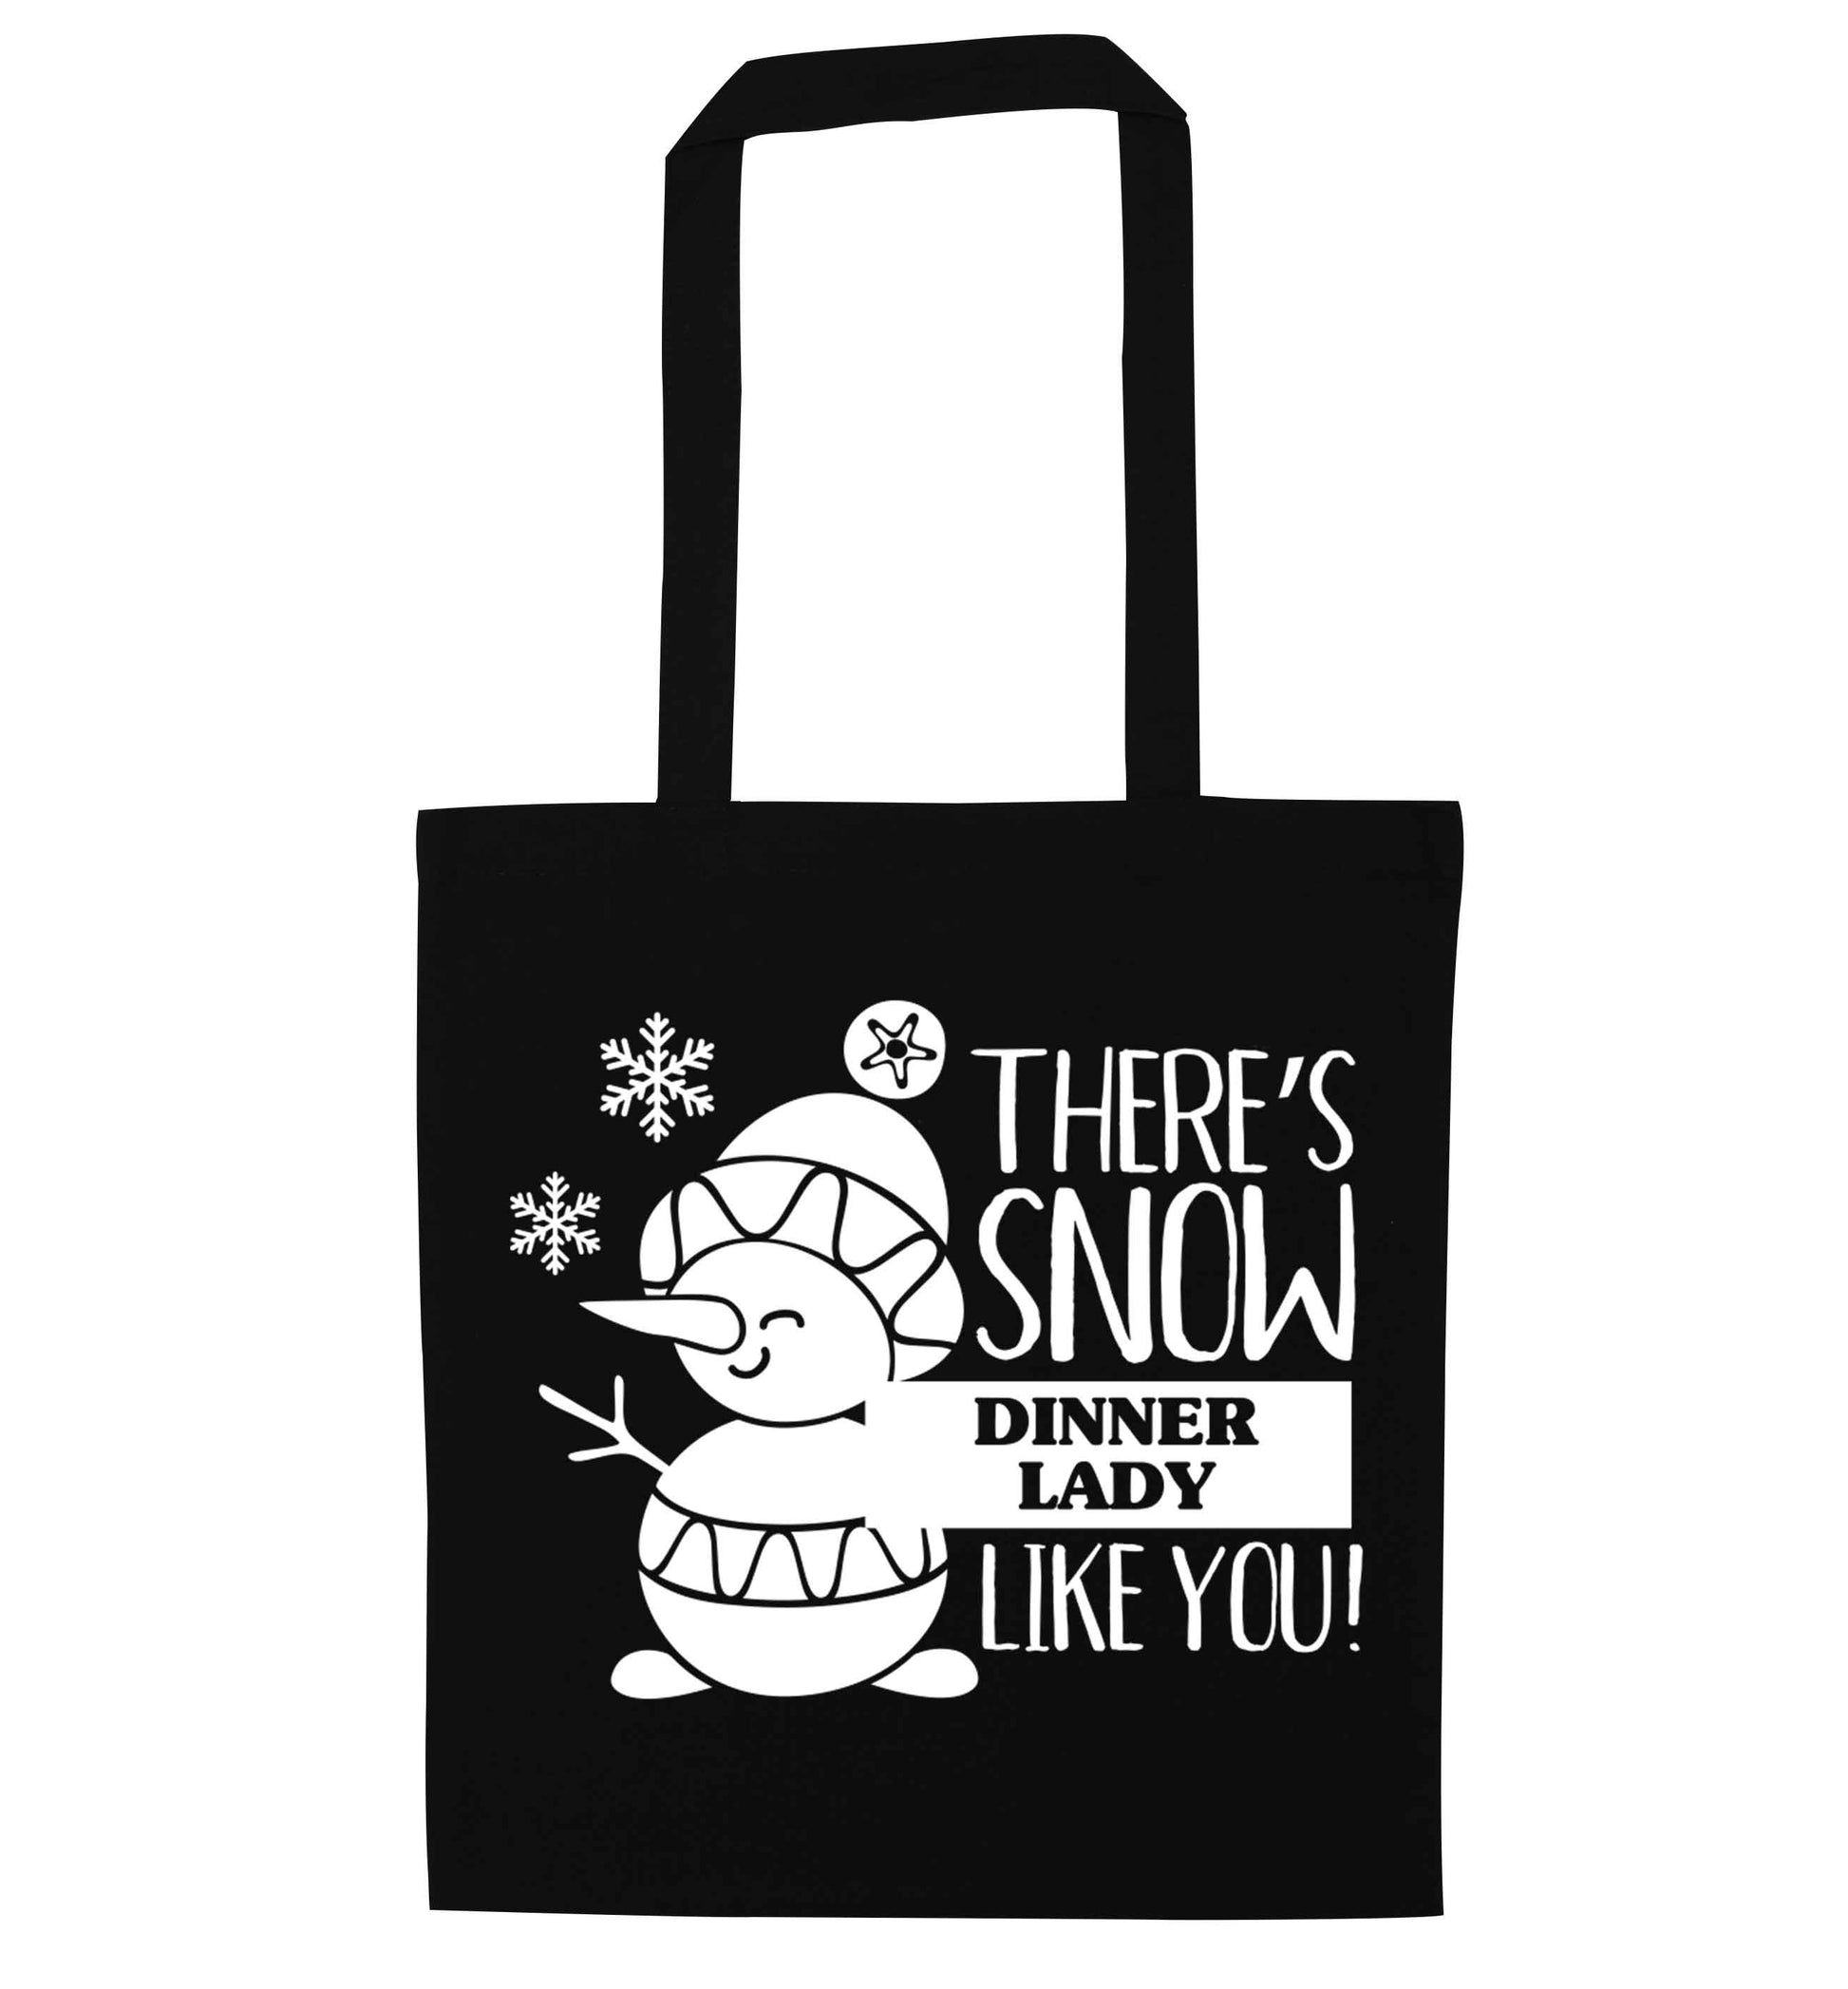 There's snow dinner lady like you black tote bag